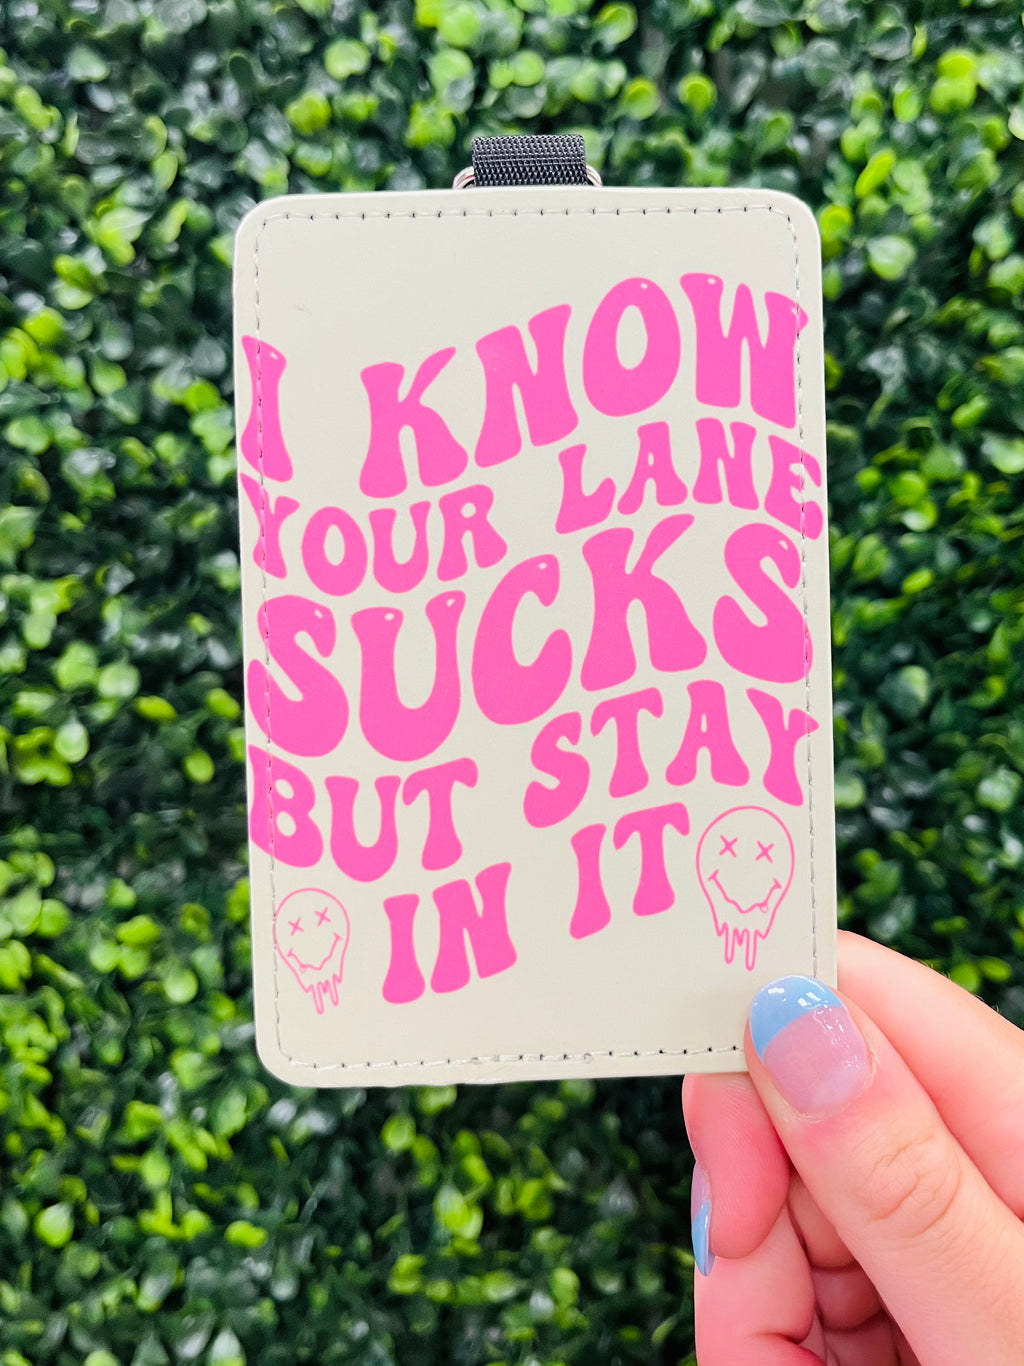 Need a way to express yourself without saying a word? Get the I Know Your Lane Sucks Card Holder Keychain! Show everyone you've got a funny, witty attitude with this quirky keychain. It'll help you stay organized while you keep it real and remind people to stay in their lane!